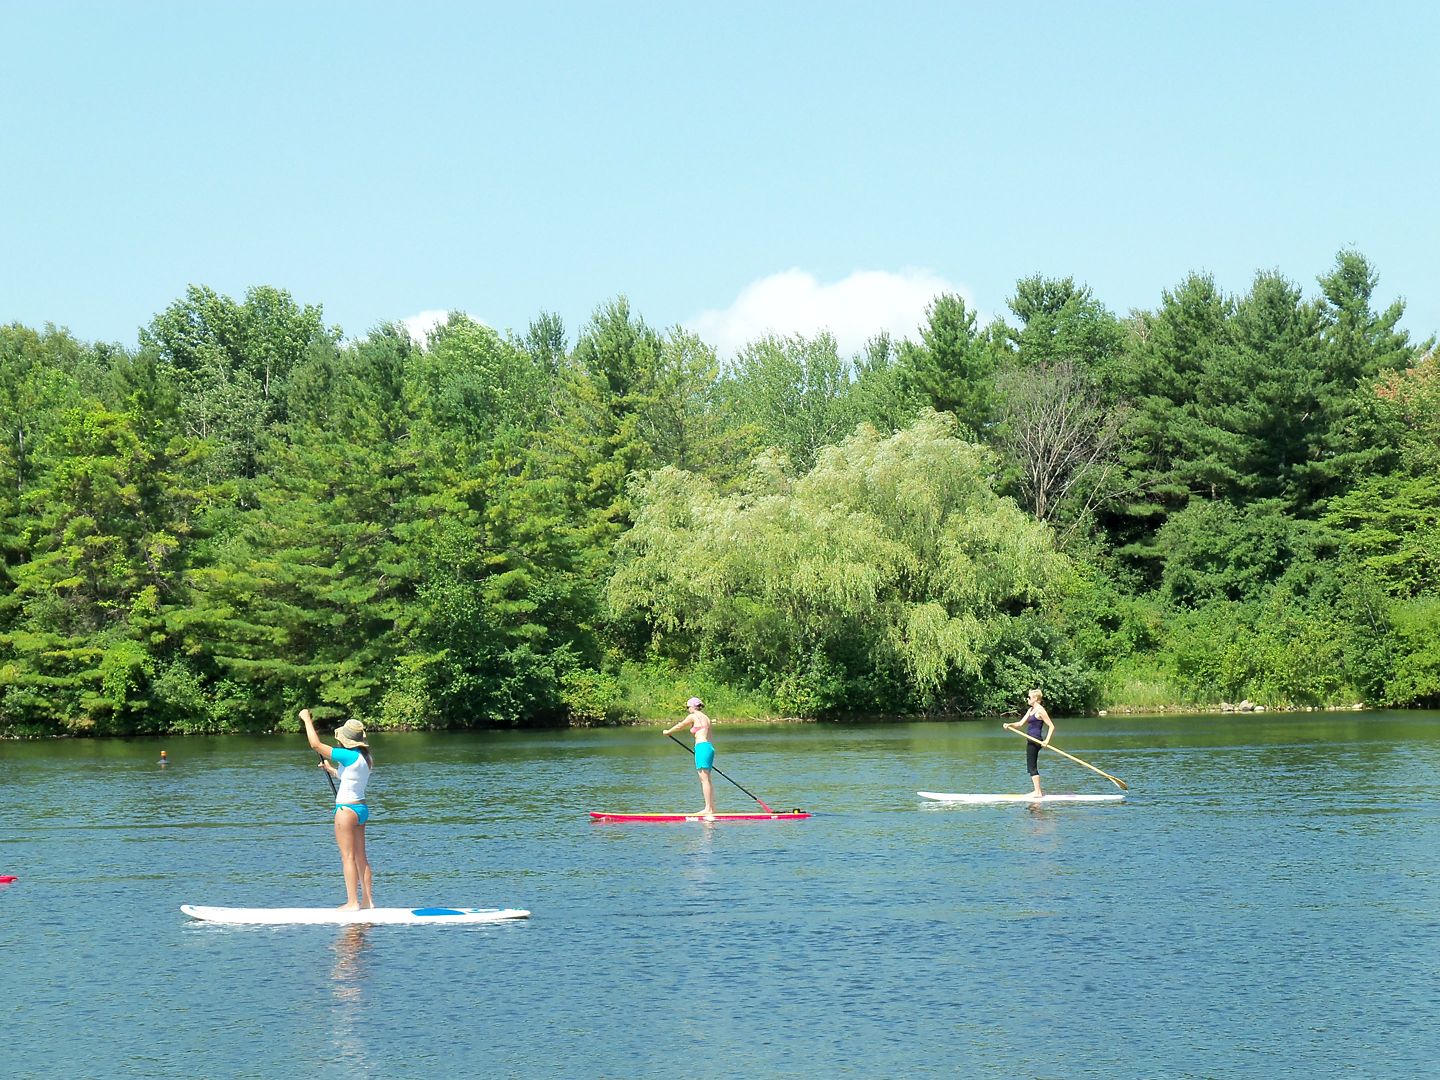 four people using stand-up paddleboards on a lake with tree in the background